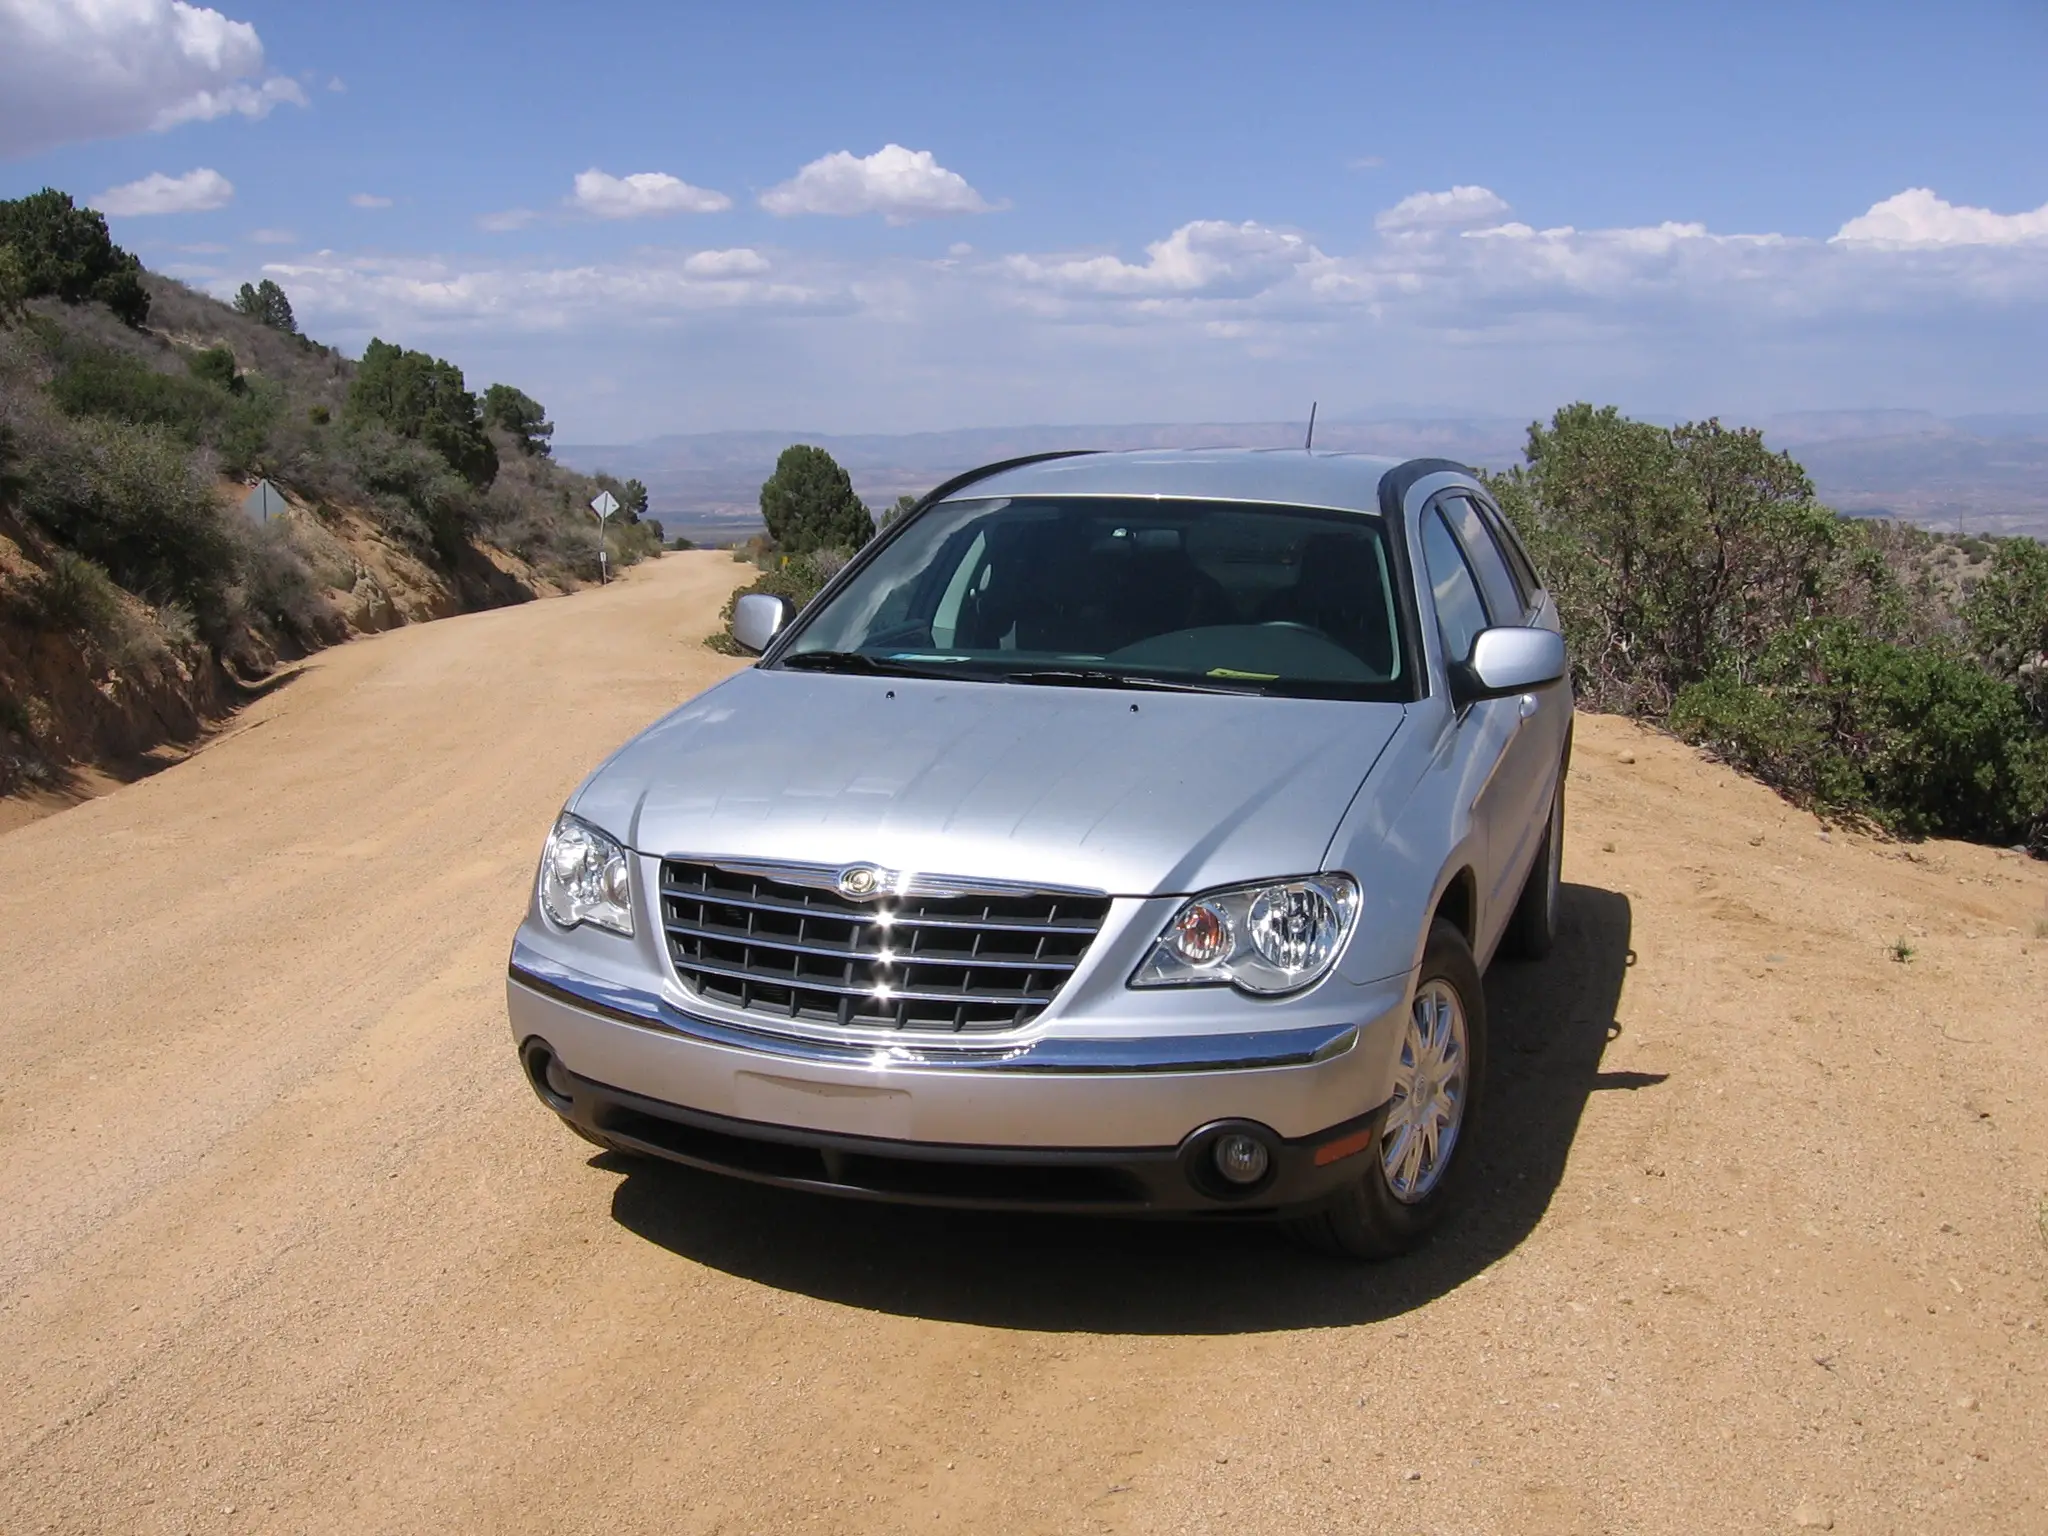 2005 Chrysler pacifica consumer review #5